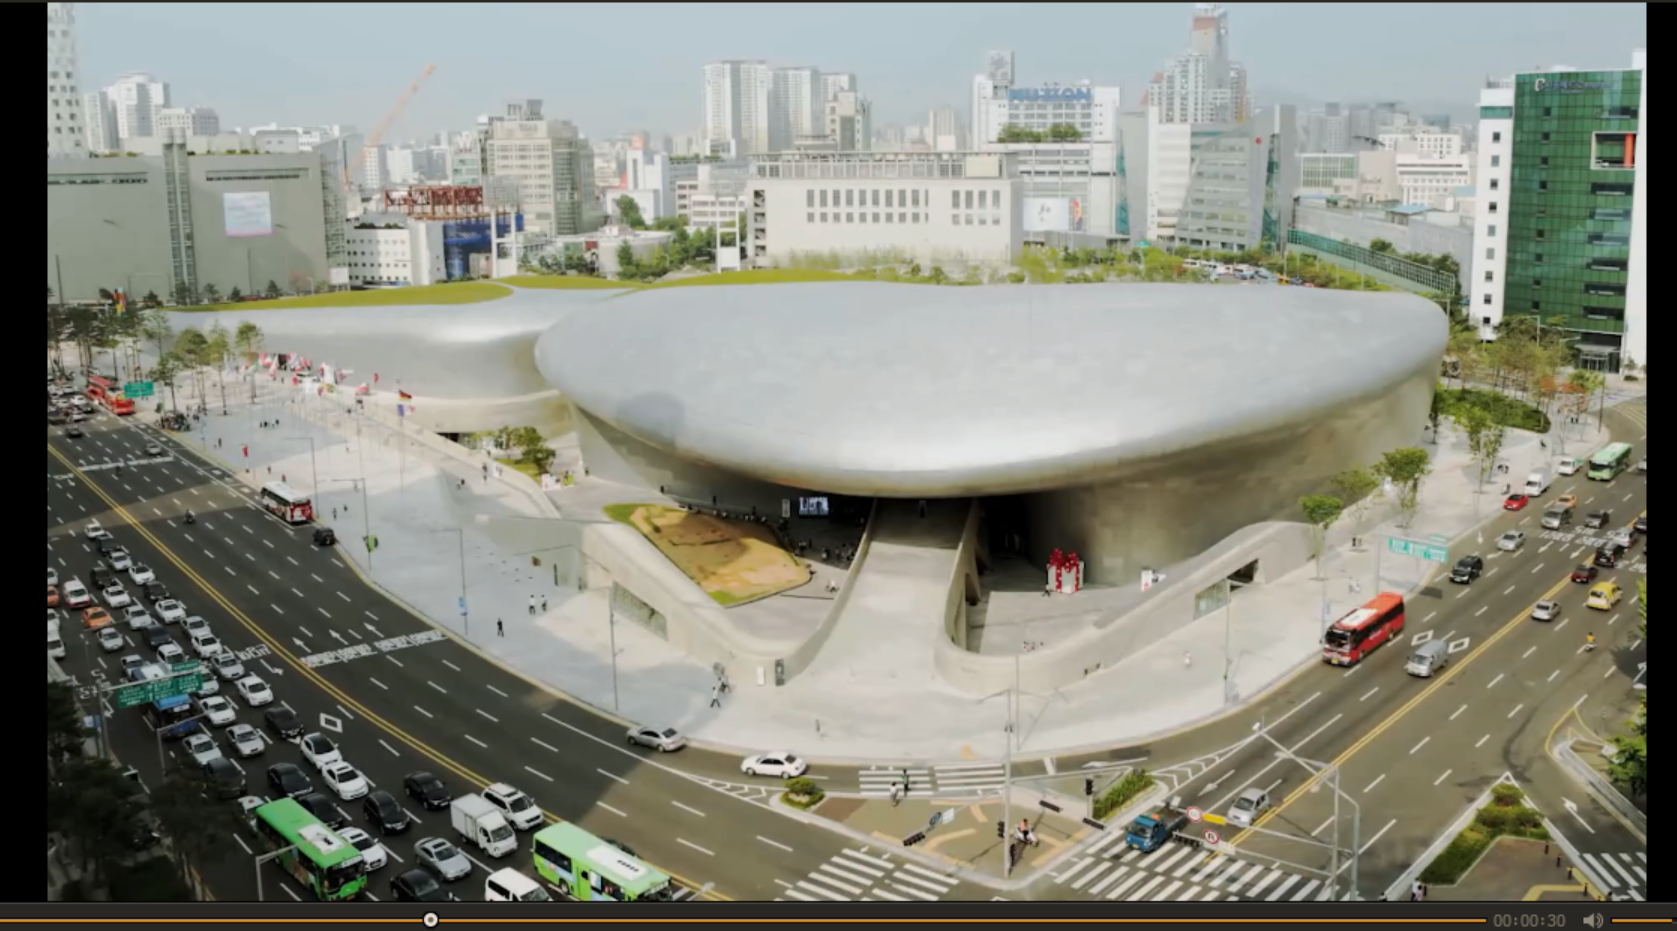 The Spaceship in Seoul celebrates its 10th anniversary Photo